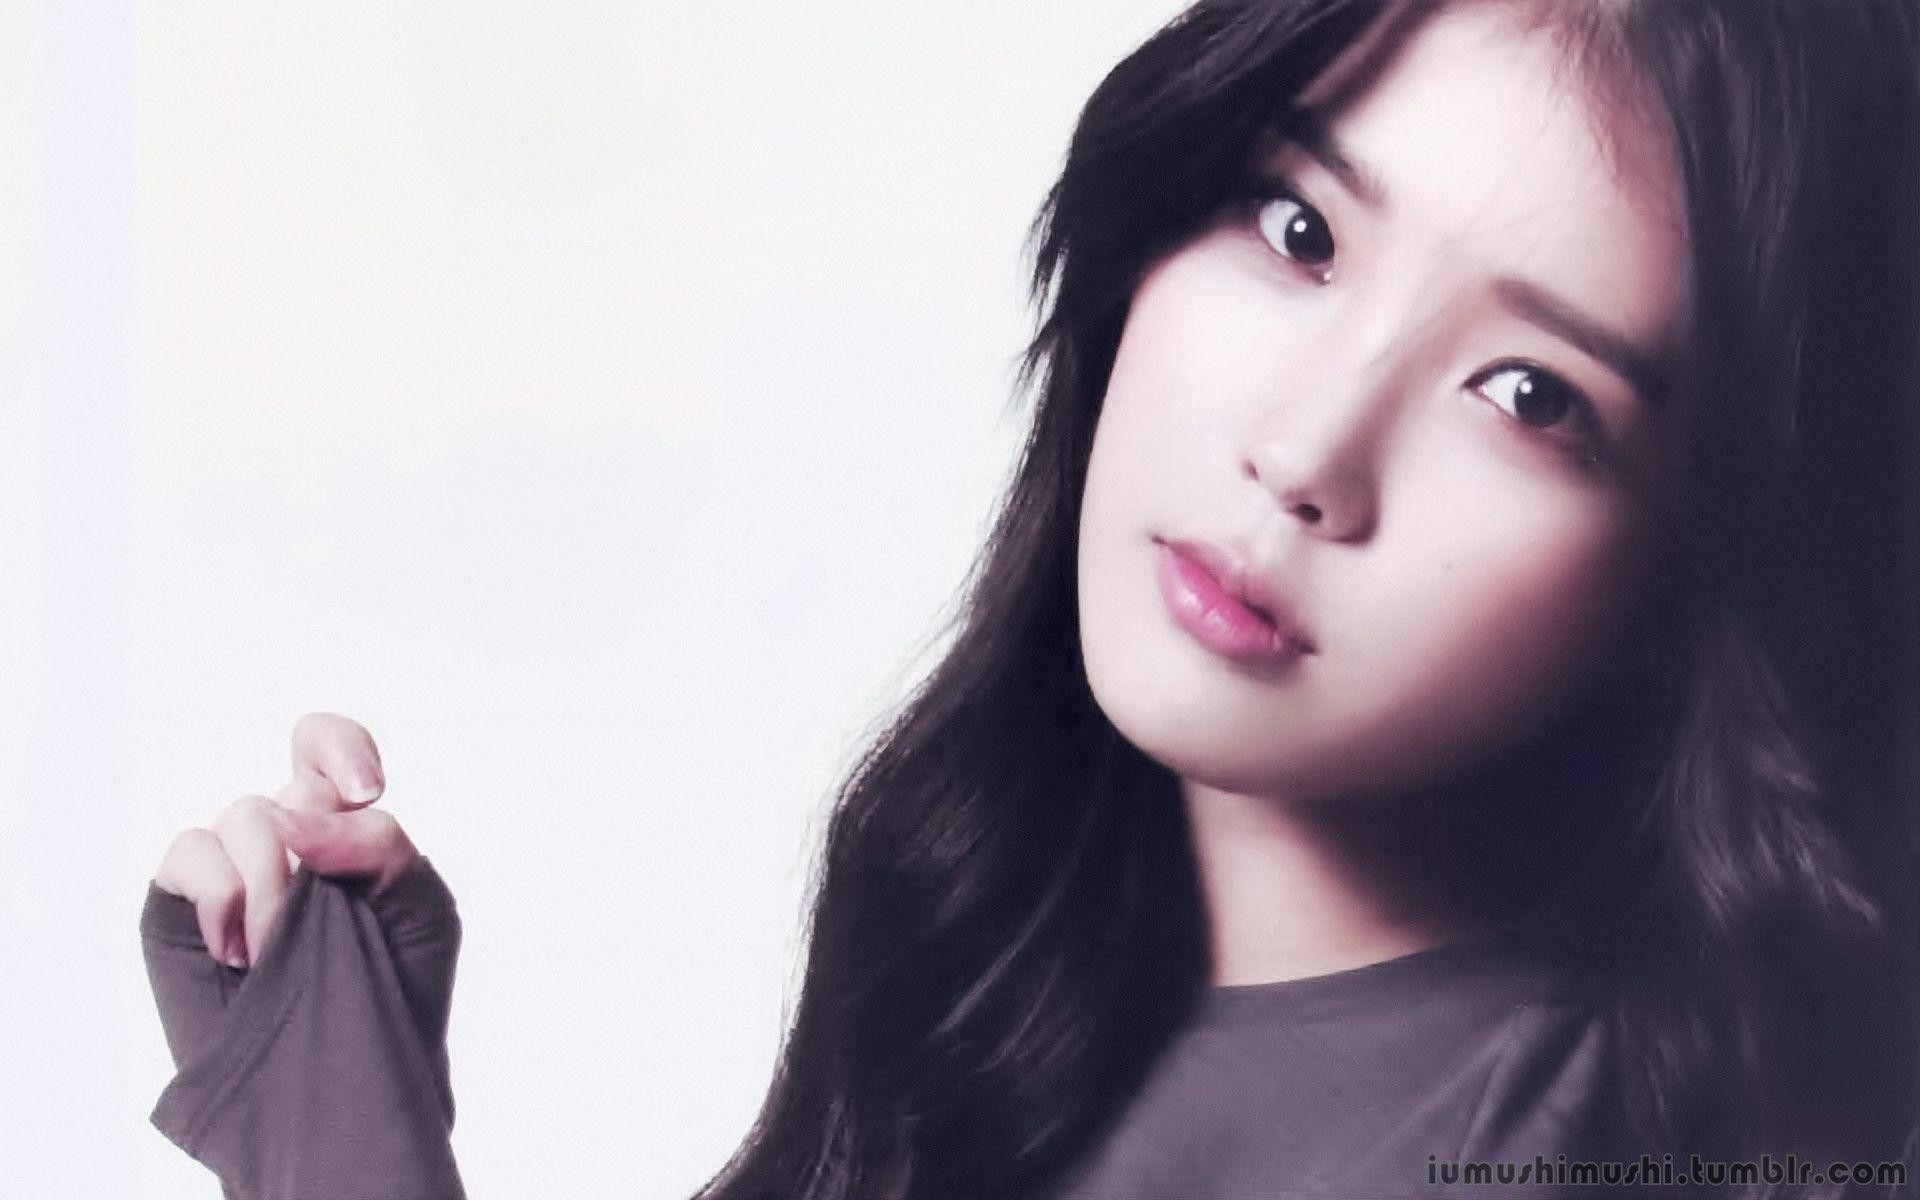 Download Iu wallpapers for mobile phone free Iu HD pictures